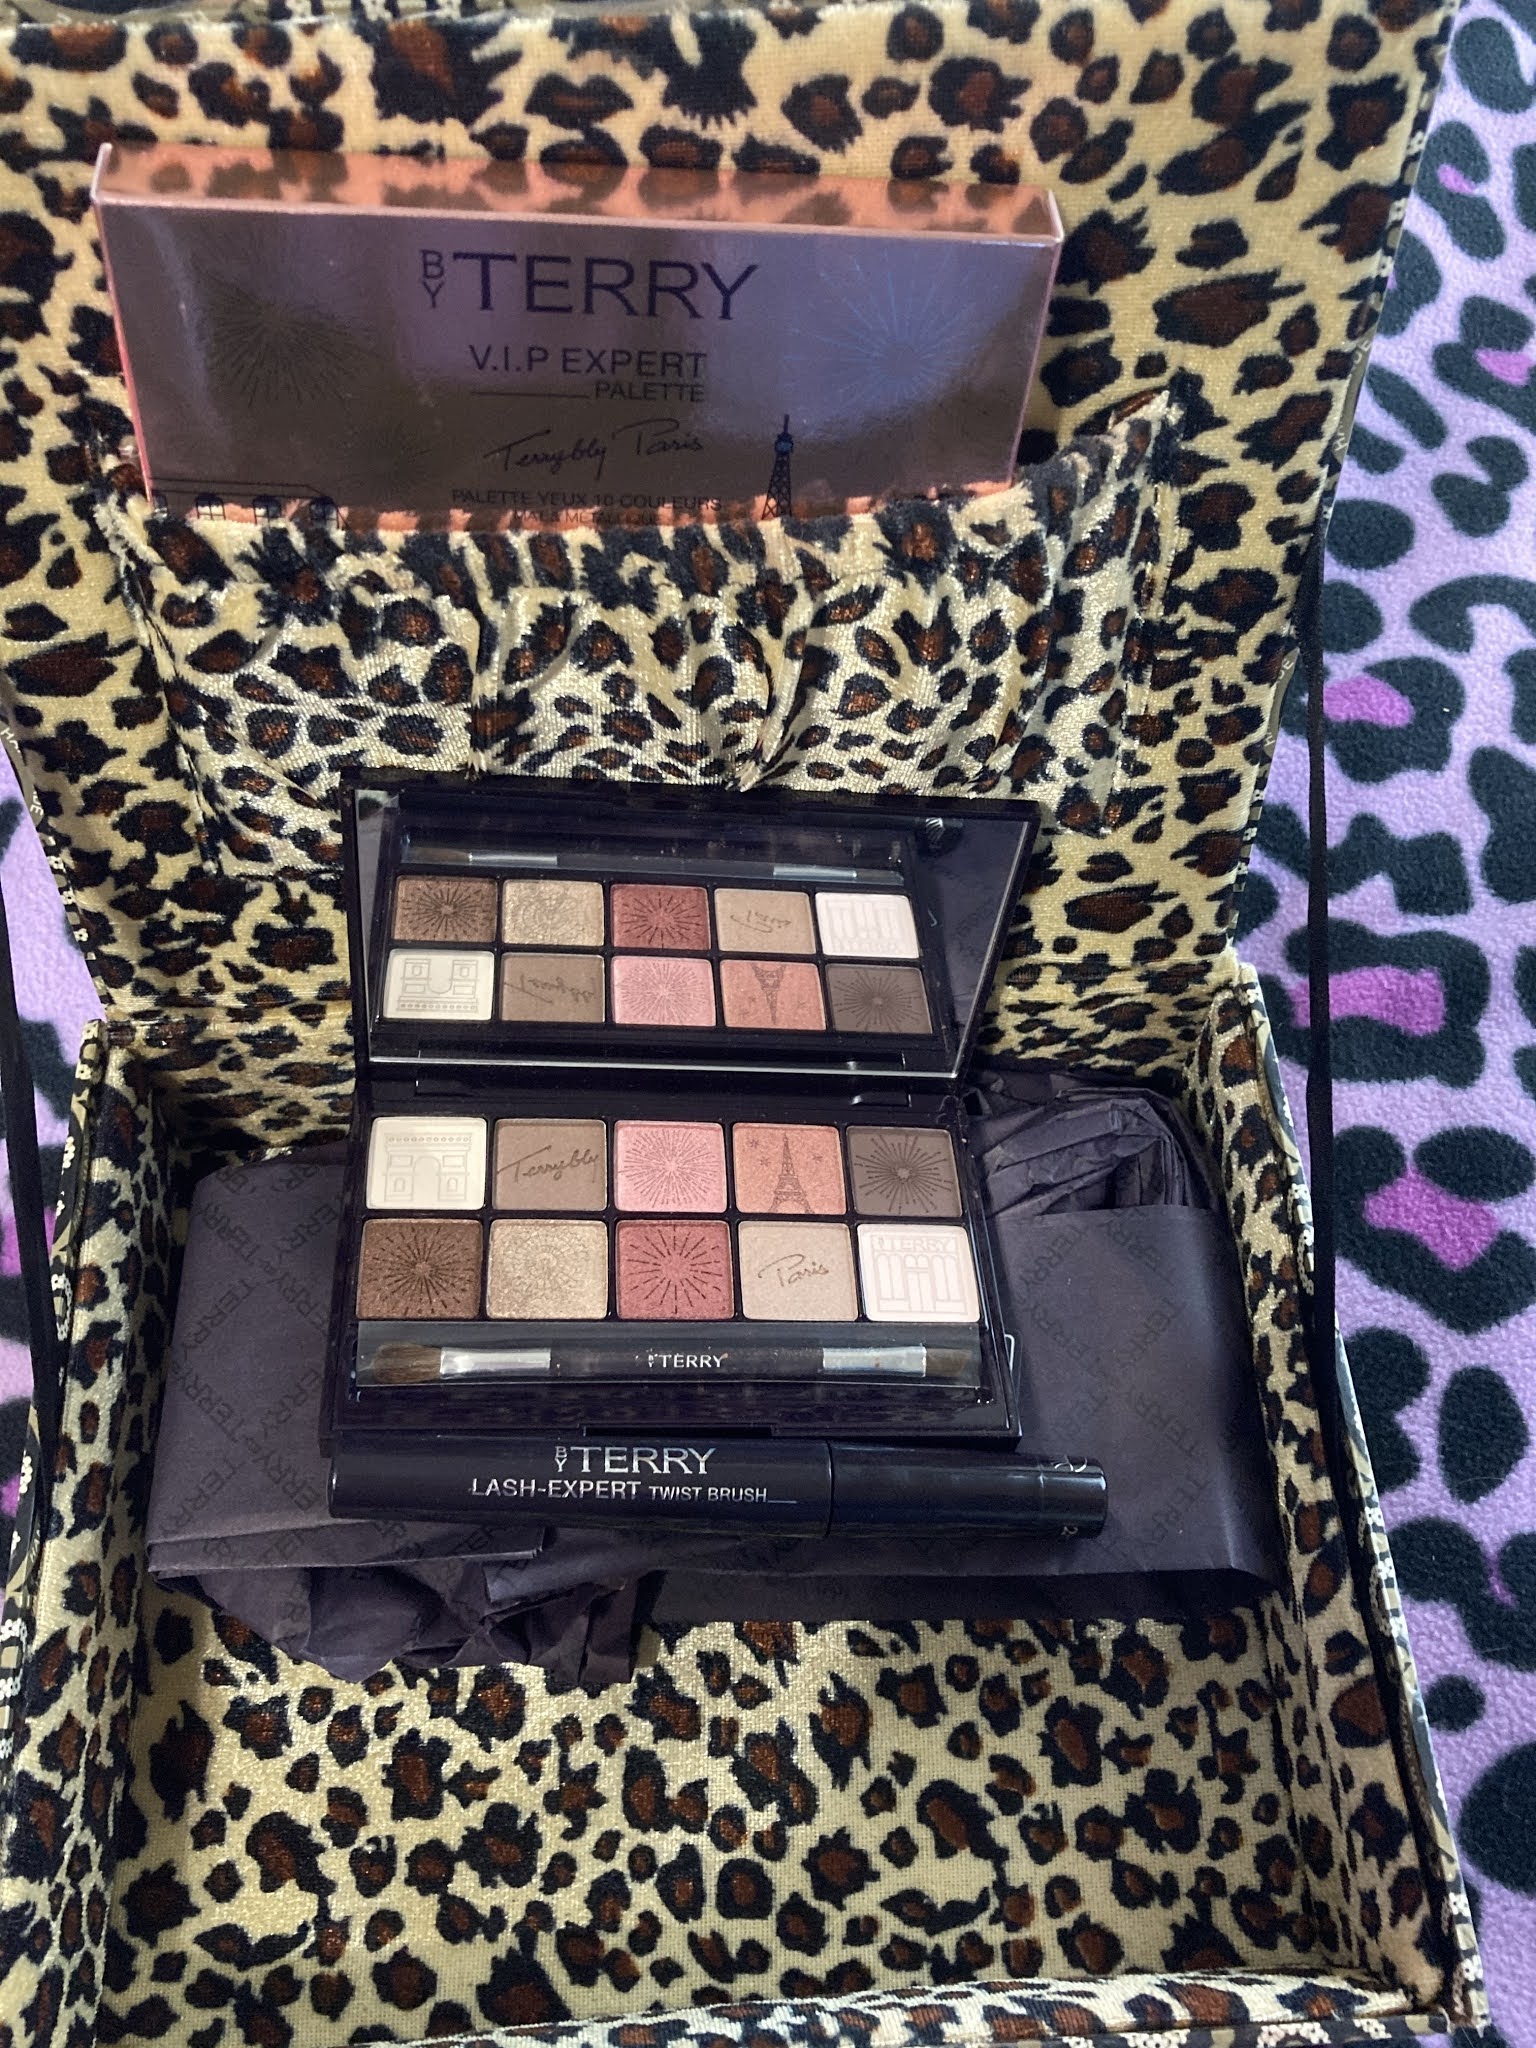 Lancome Bronze Amour Eyeshadow Palette Review, Photos, Swatches